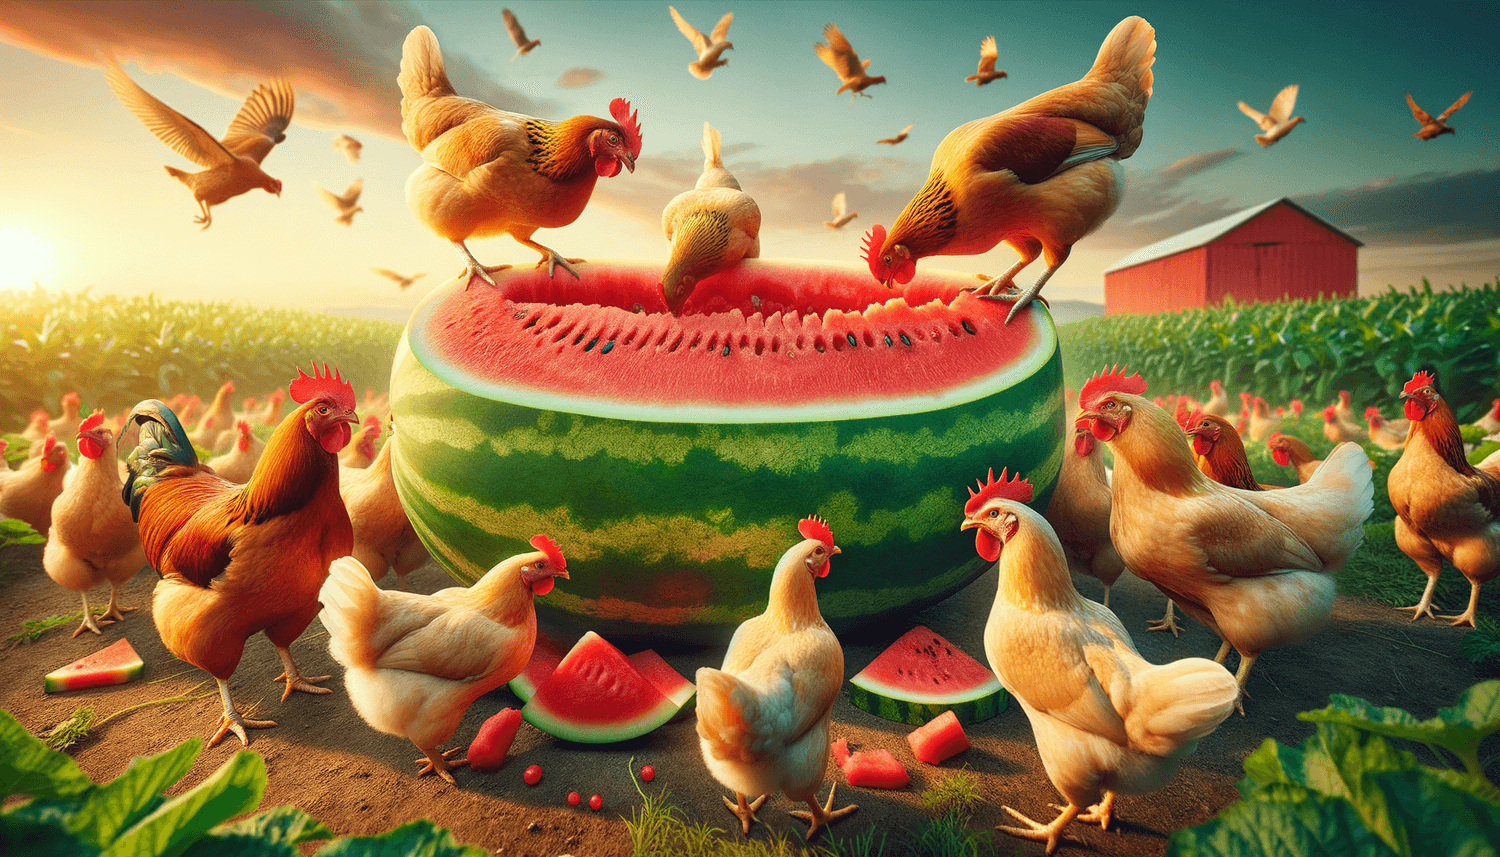 Can Chickens Eat Watermelon Rind?